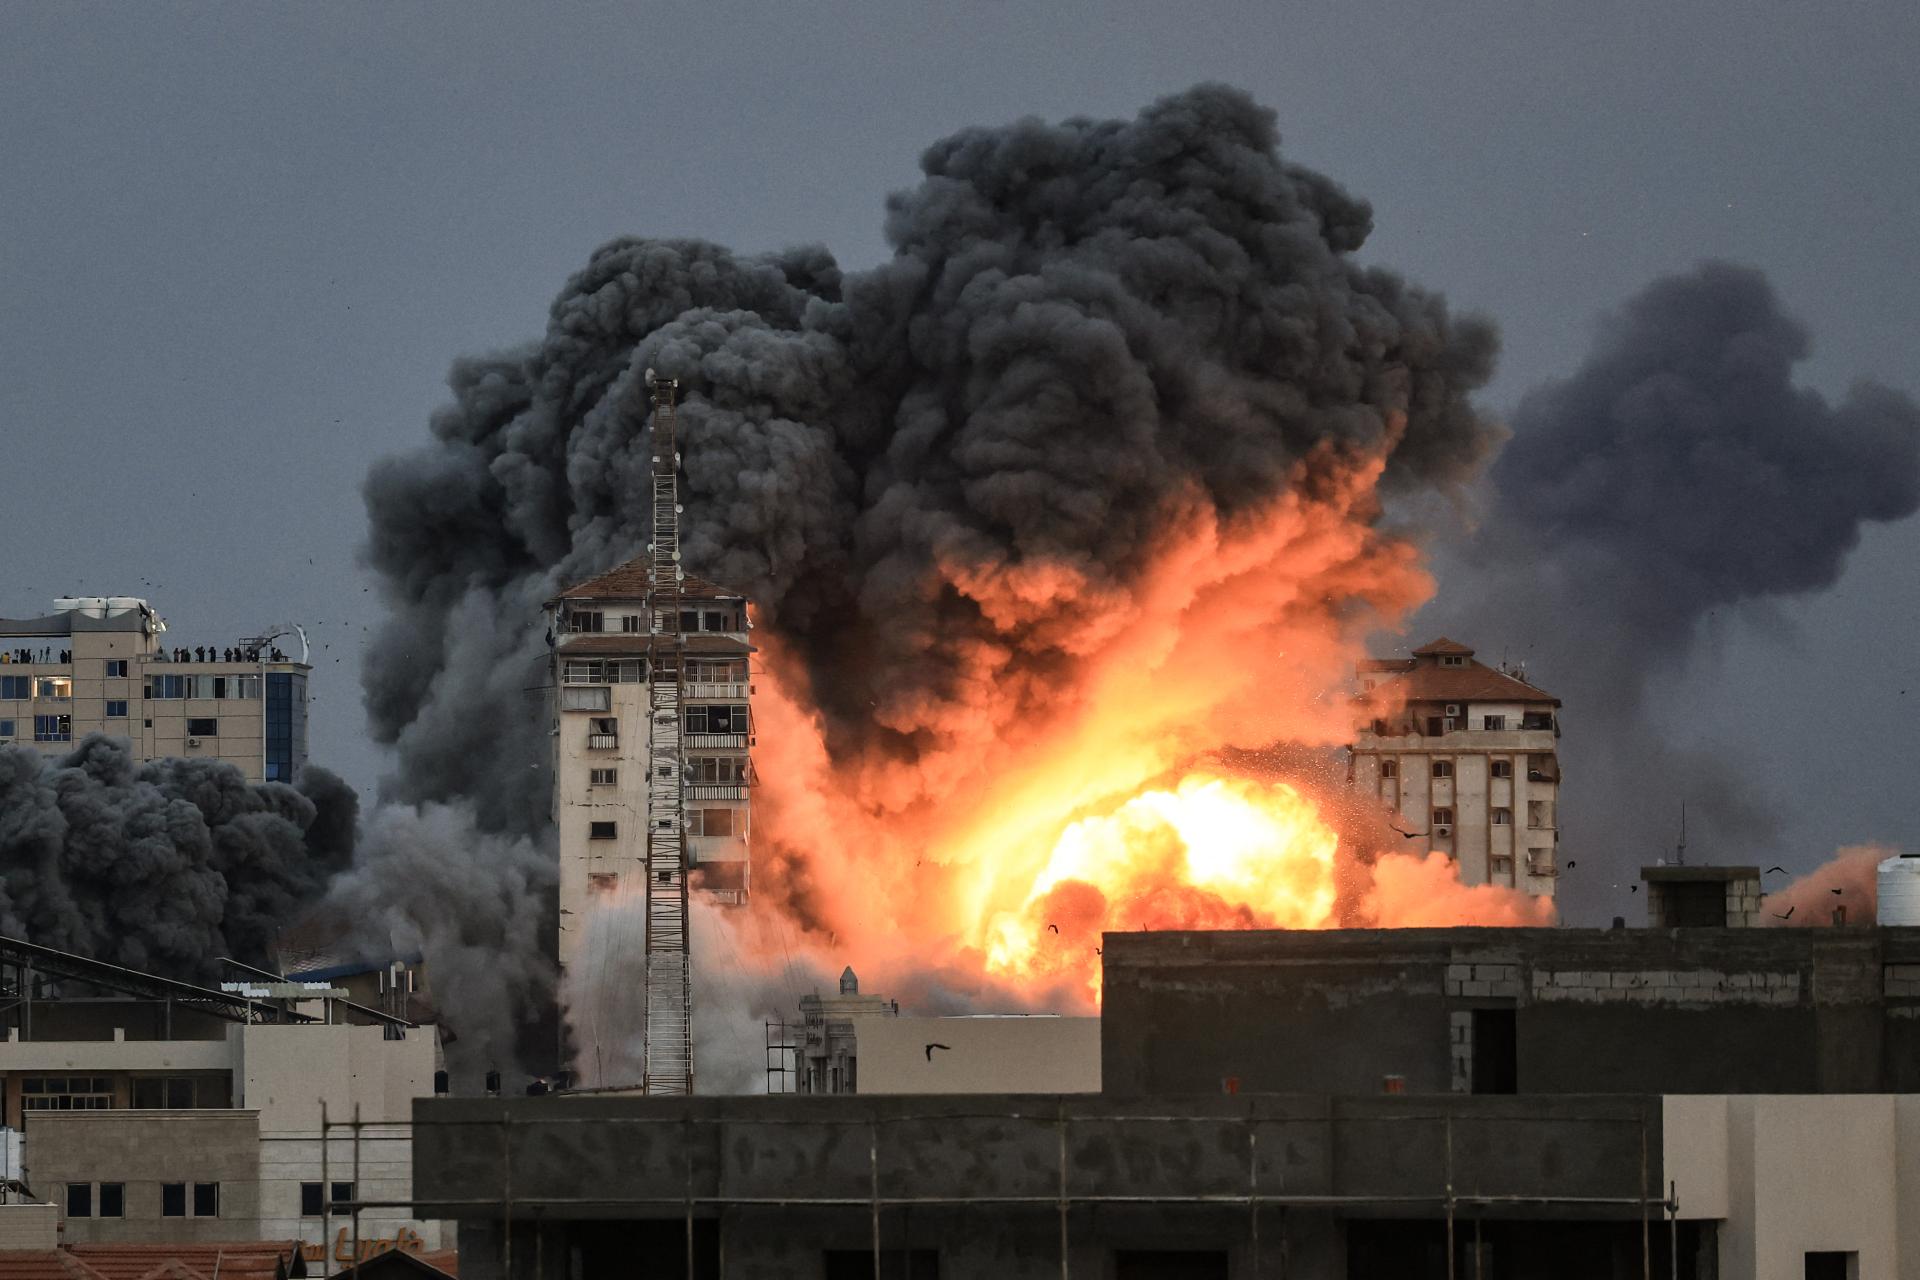 Image showing people standing on a rooftop watch as a ball of fire and smoke rises above a building in Gaza City on October 7, 2023 during an Israeli air strike that hit the Palestine Tower building.